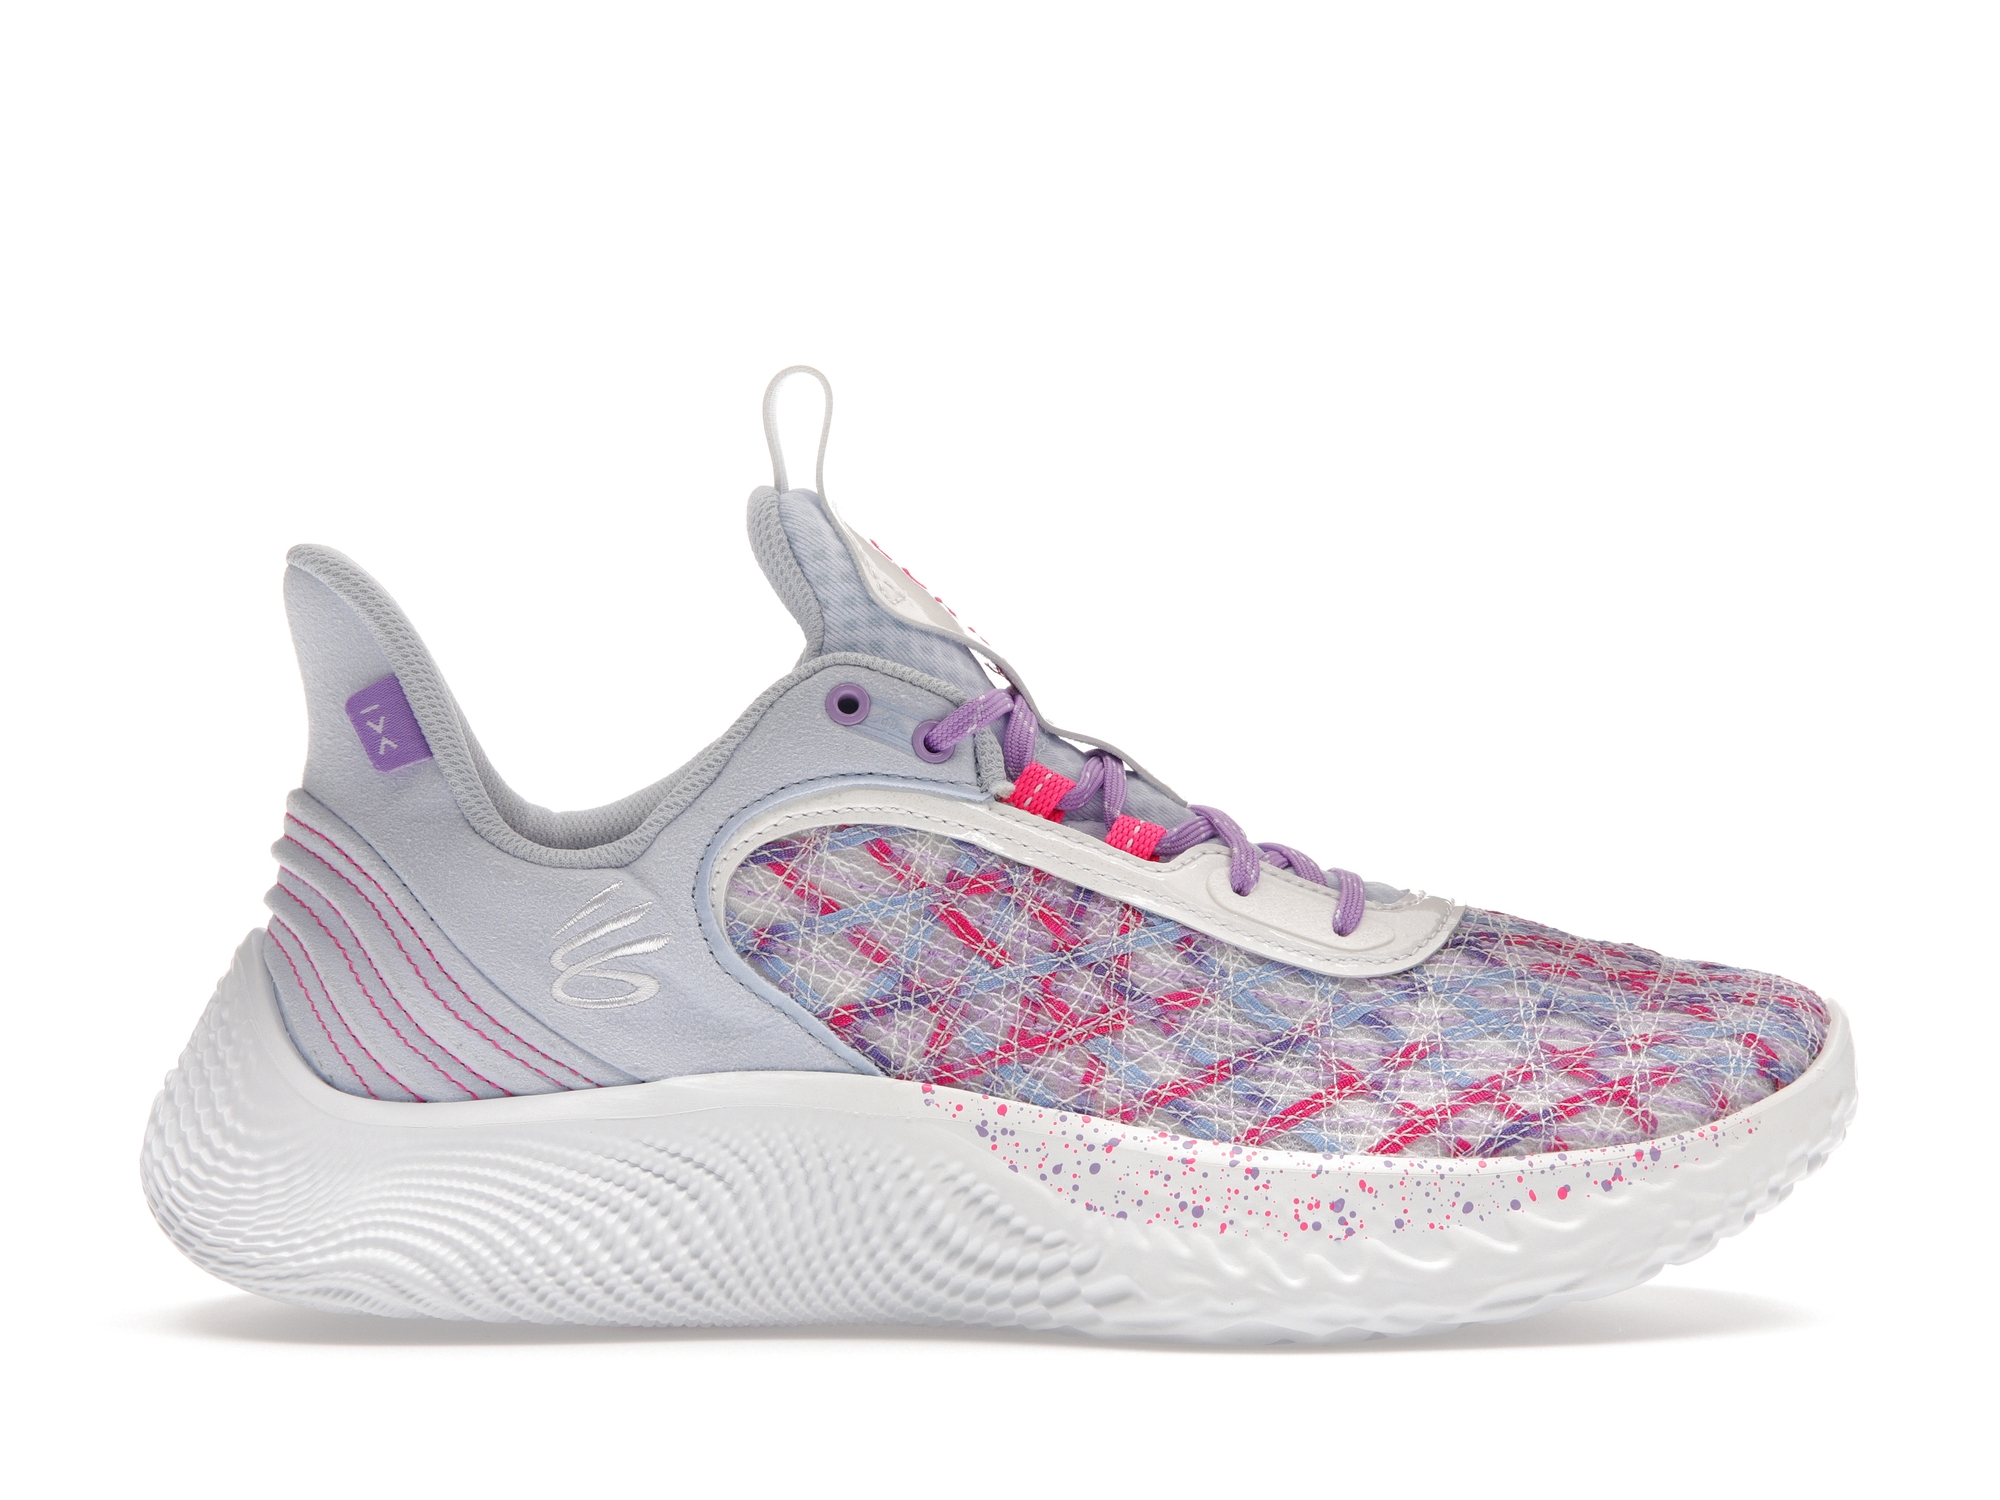 Under Armour Curry Flow 9 For the W Men's - 3025684-401 - US